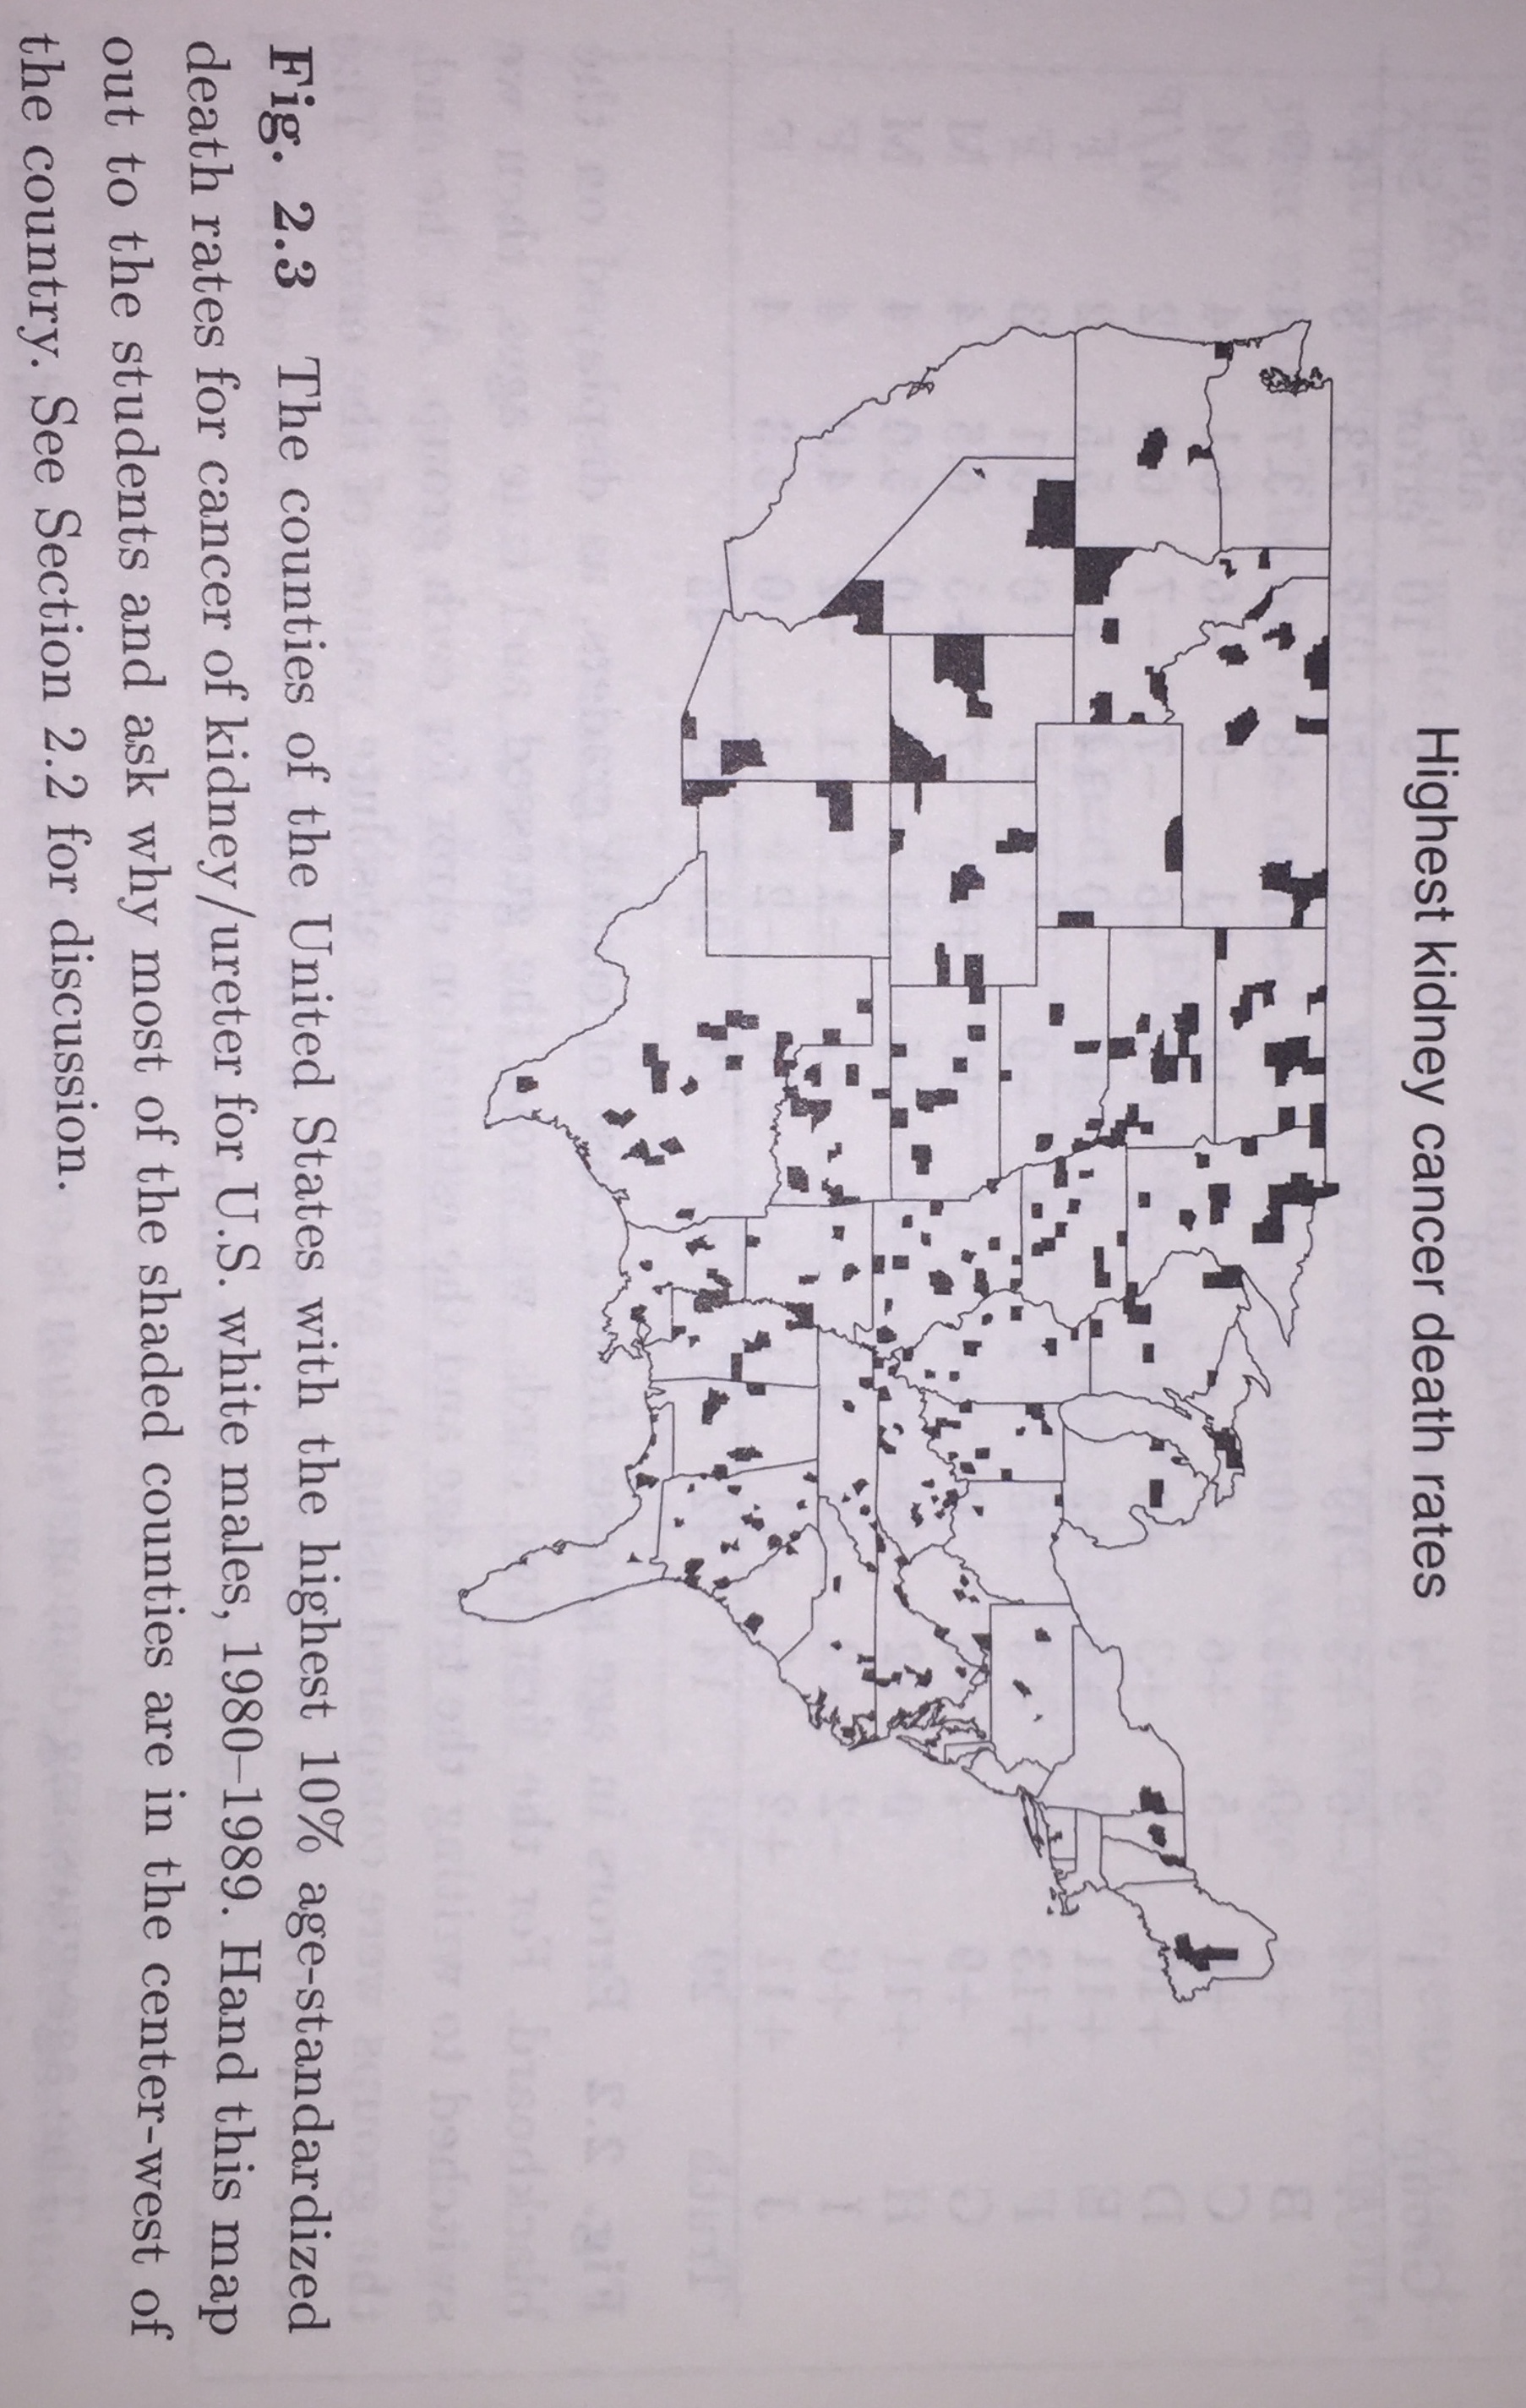 The caption reads: the counties of the United States with the highest 10% age-standardized death rates for cancer of kidney/ureter for U.S. white males, 1980-1989.